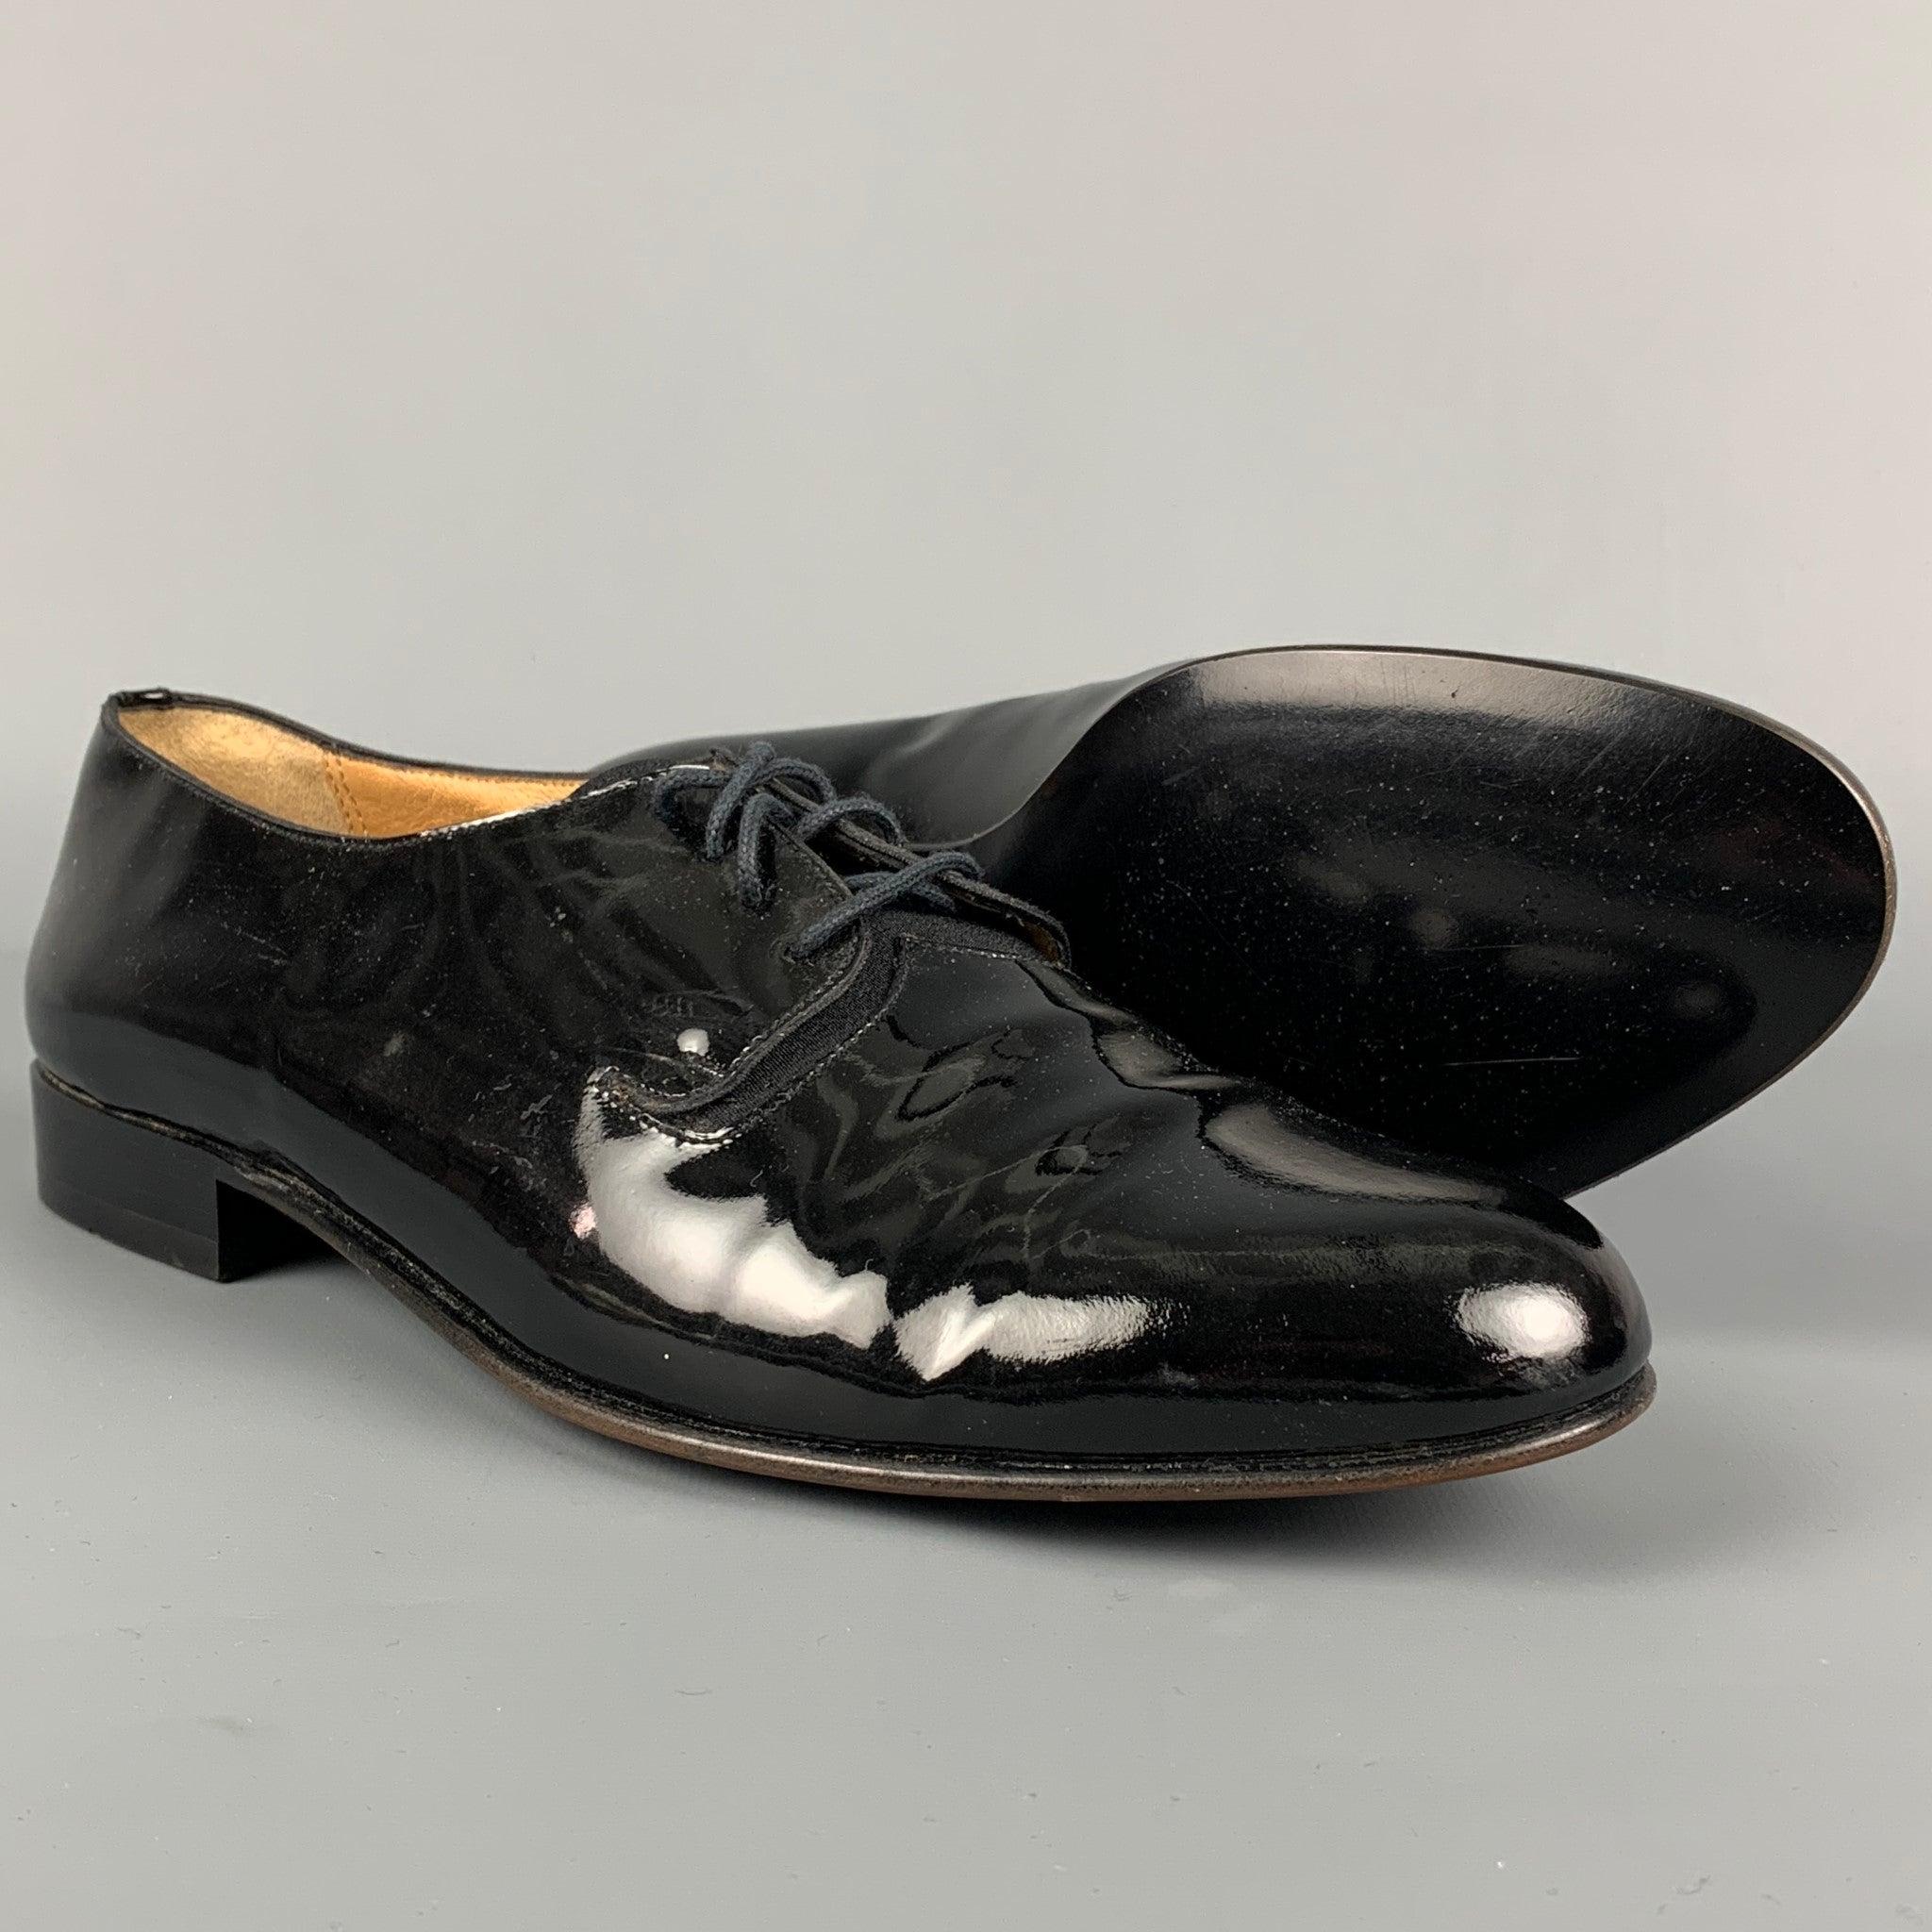 BALLY Bice Size 8 Black Patent Leather Lace Up Shoes In Good Condition For Sale In San Francisco, CA